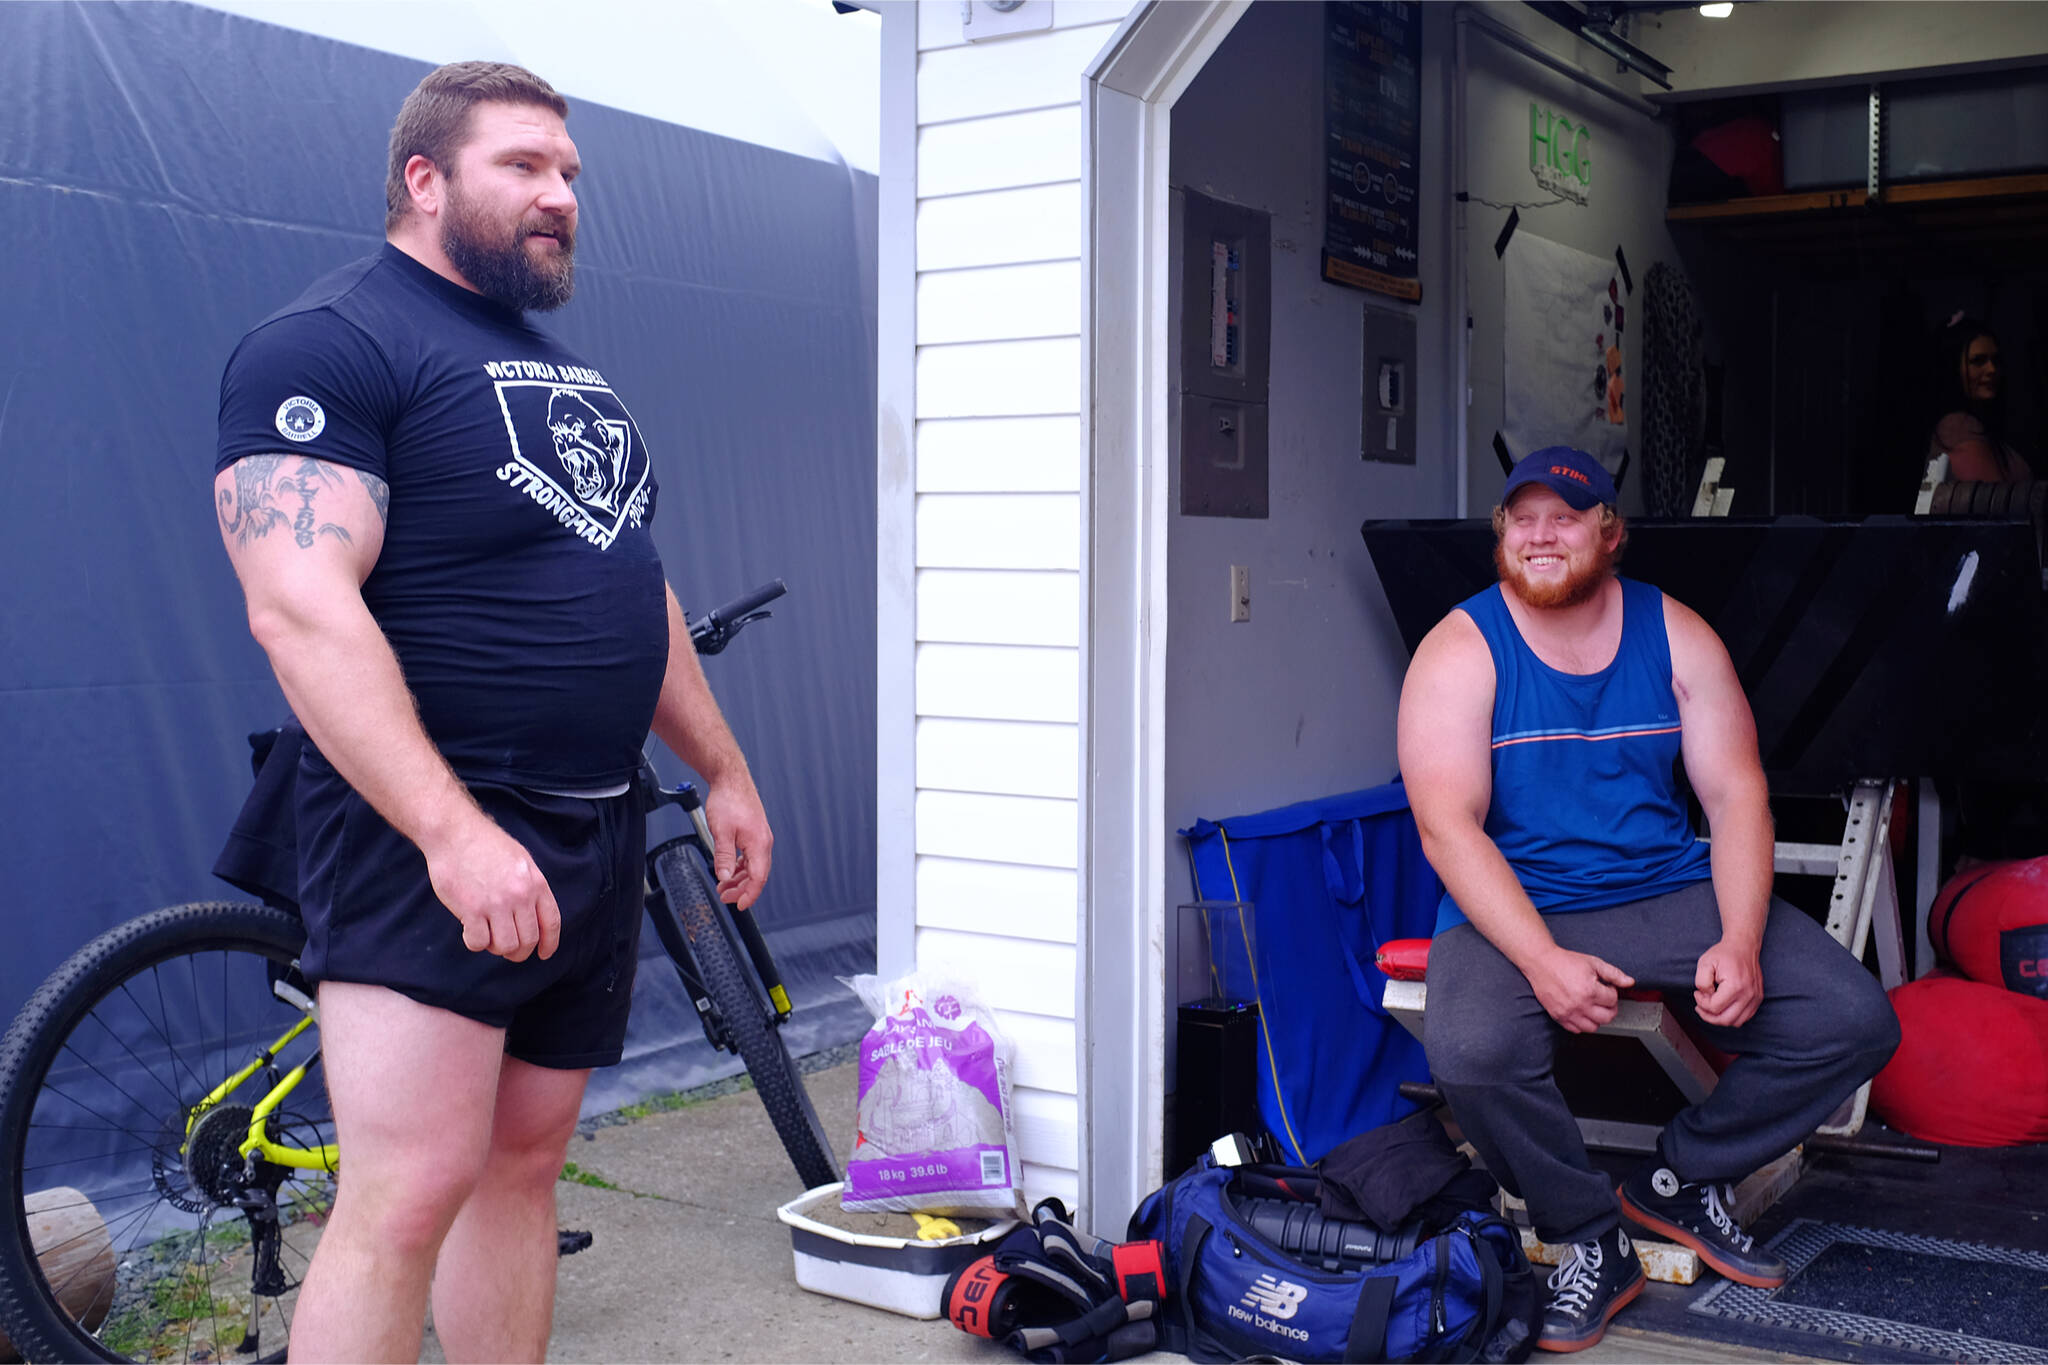 ‘B.C.’s strongest man’, Sean B. Hayes (left), alongside Kalem Nygren, will be heading to Duncan on July 1 for B.C.’s first-ever professional strongman show. The two men can be seen at Hayes’ home gym on the afternoon of June 1. (Olivier Laurin / Comox Valley Record)